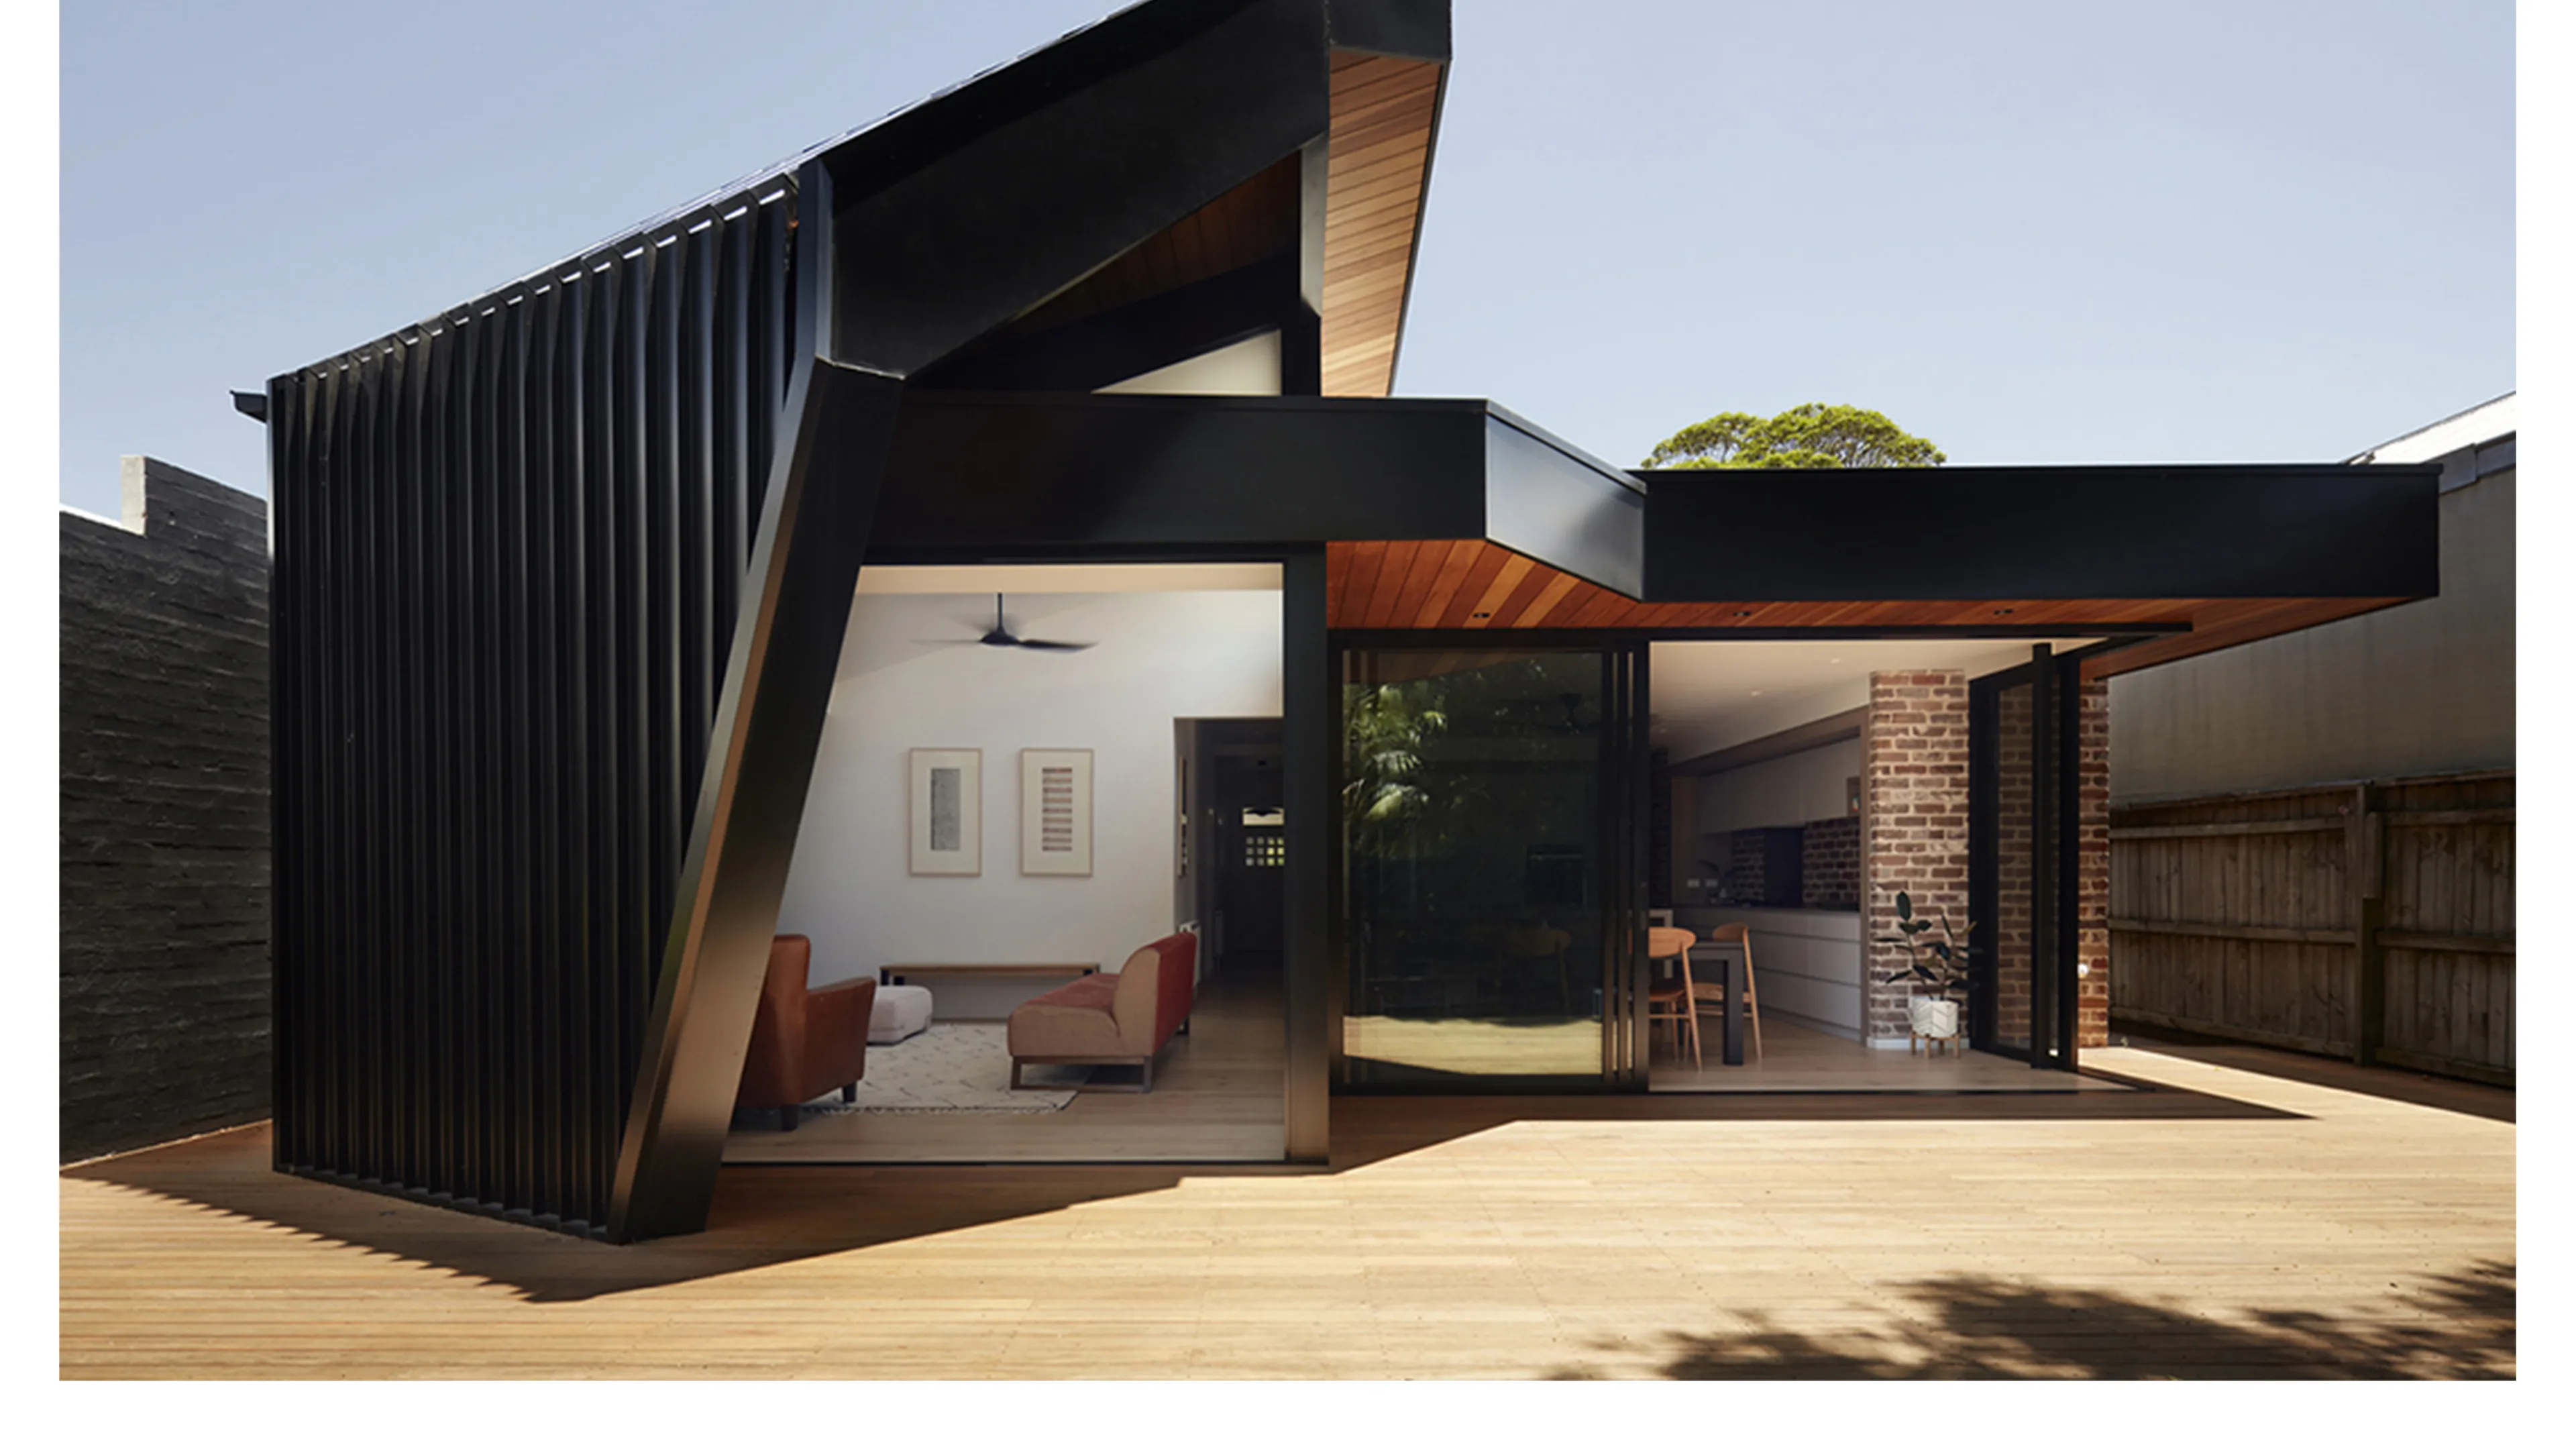 hunters hill house by joshua mulders architects 0 edit 3000